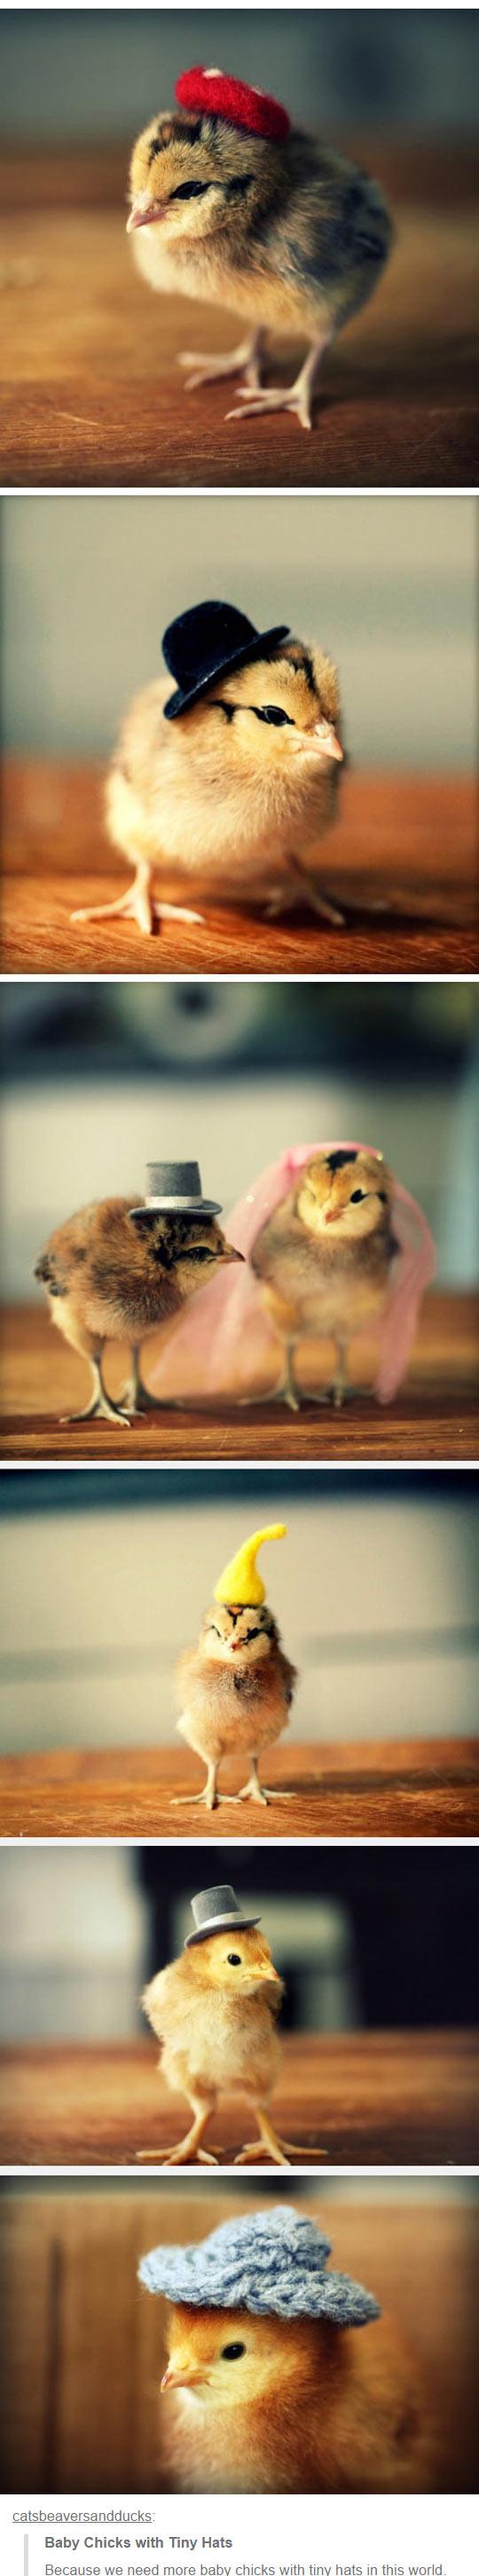 Chicks look good in hats.